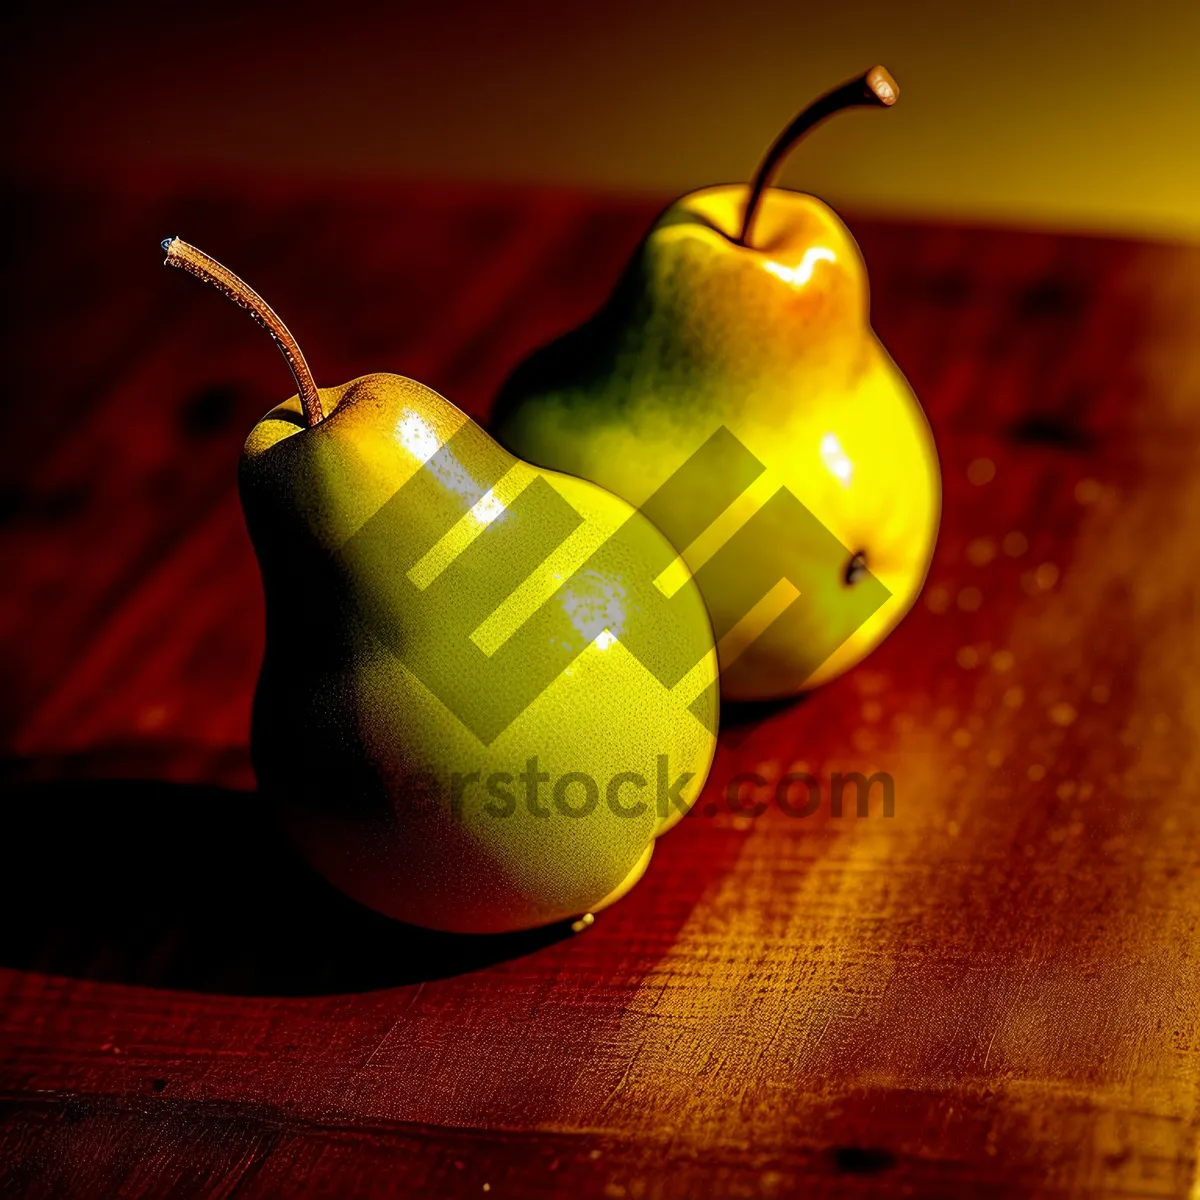 Picture of Delicious and Nutritious Pear: A Refreshing and Healthy Snack